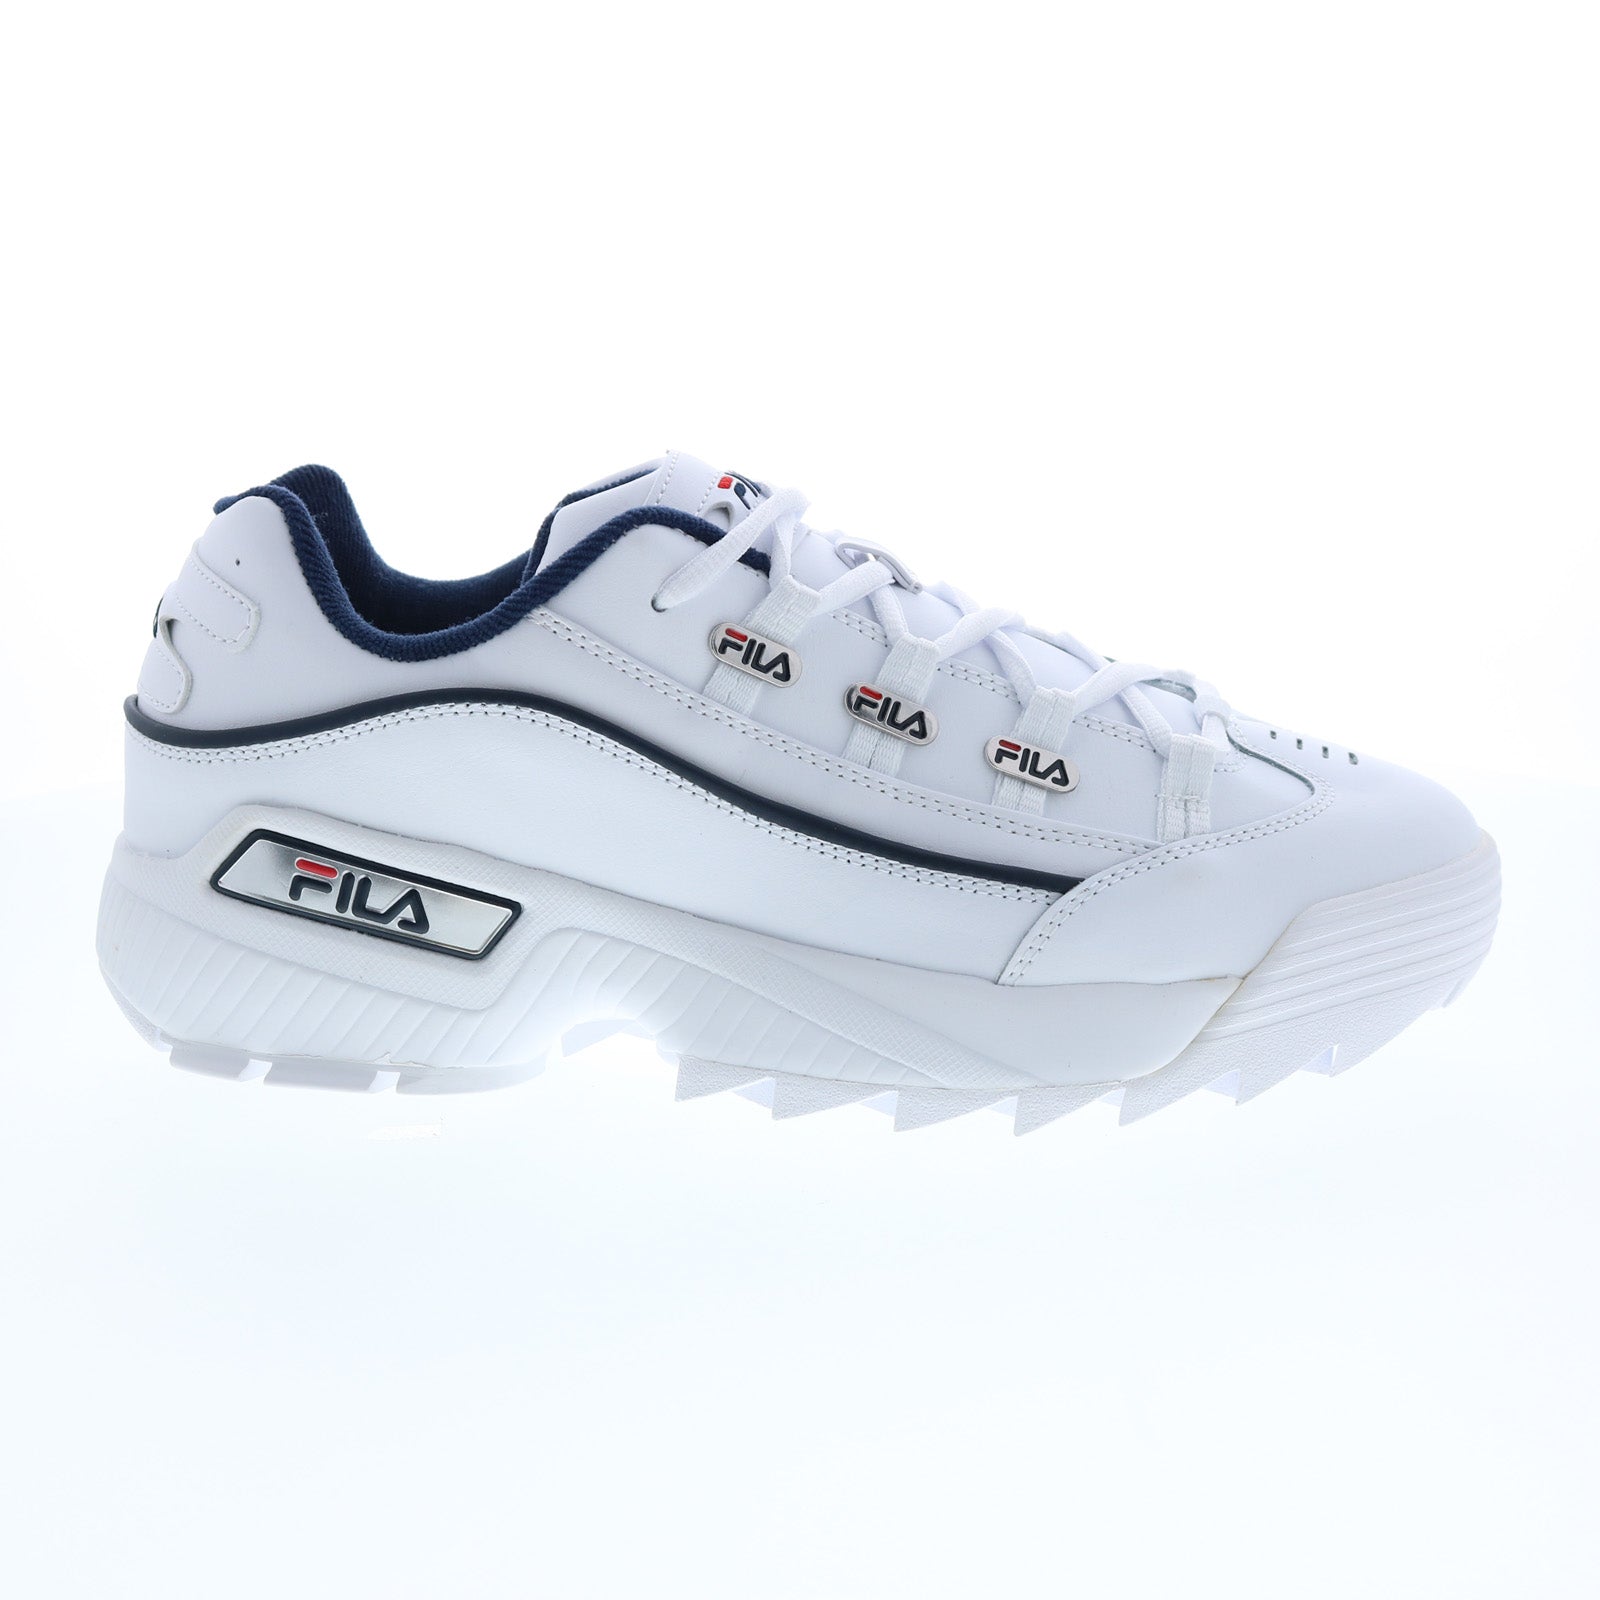 Fila Hometown Mens White Leather Lifestyle Sneakers Shoes 10.5 - Ruze Shoes